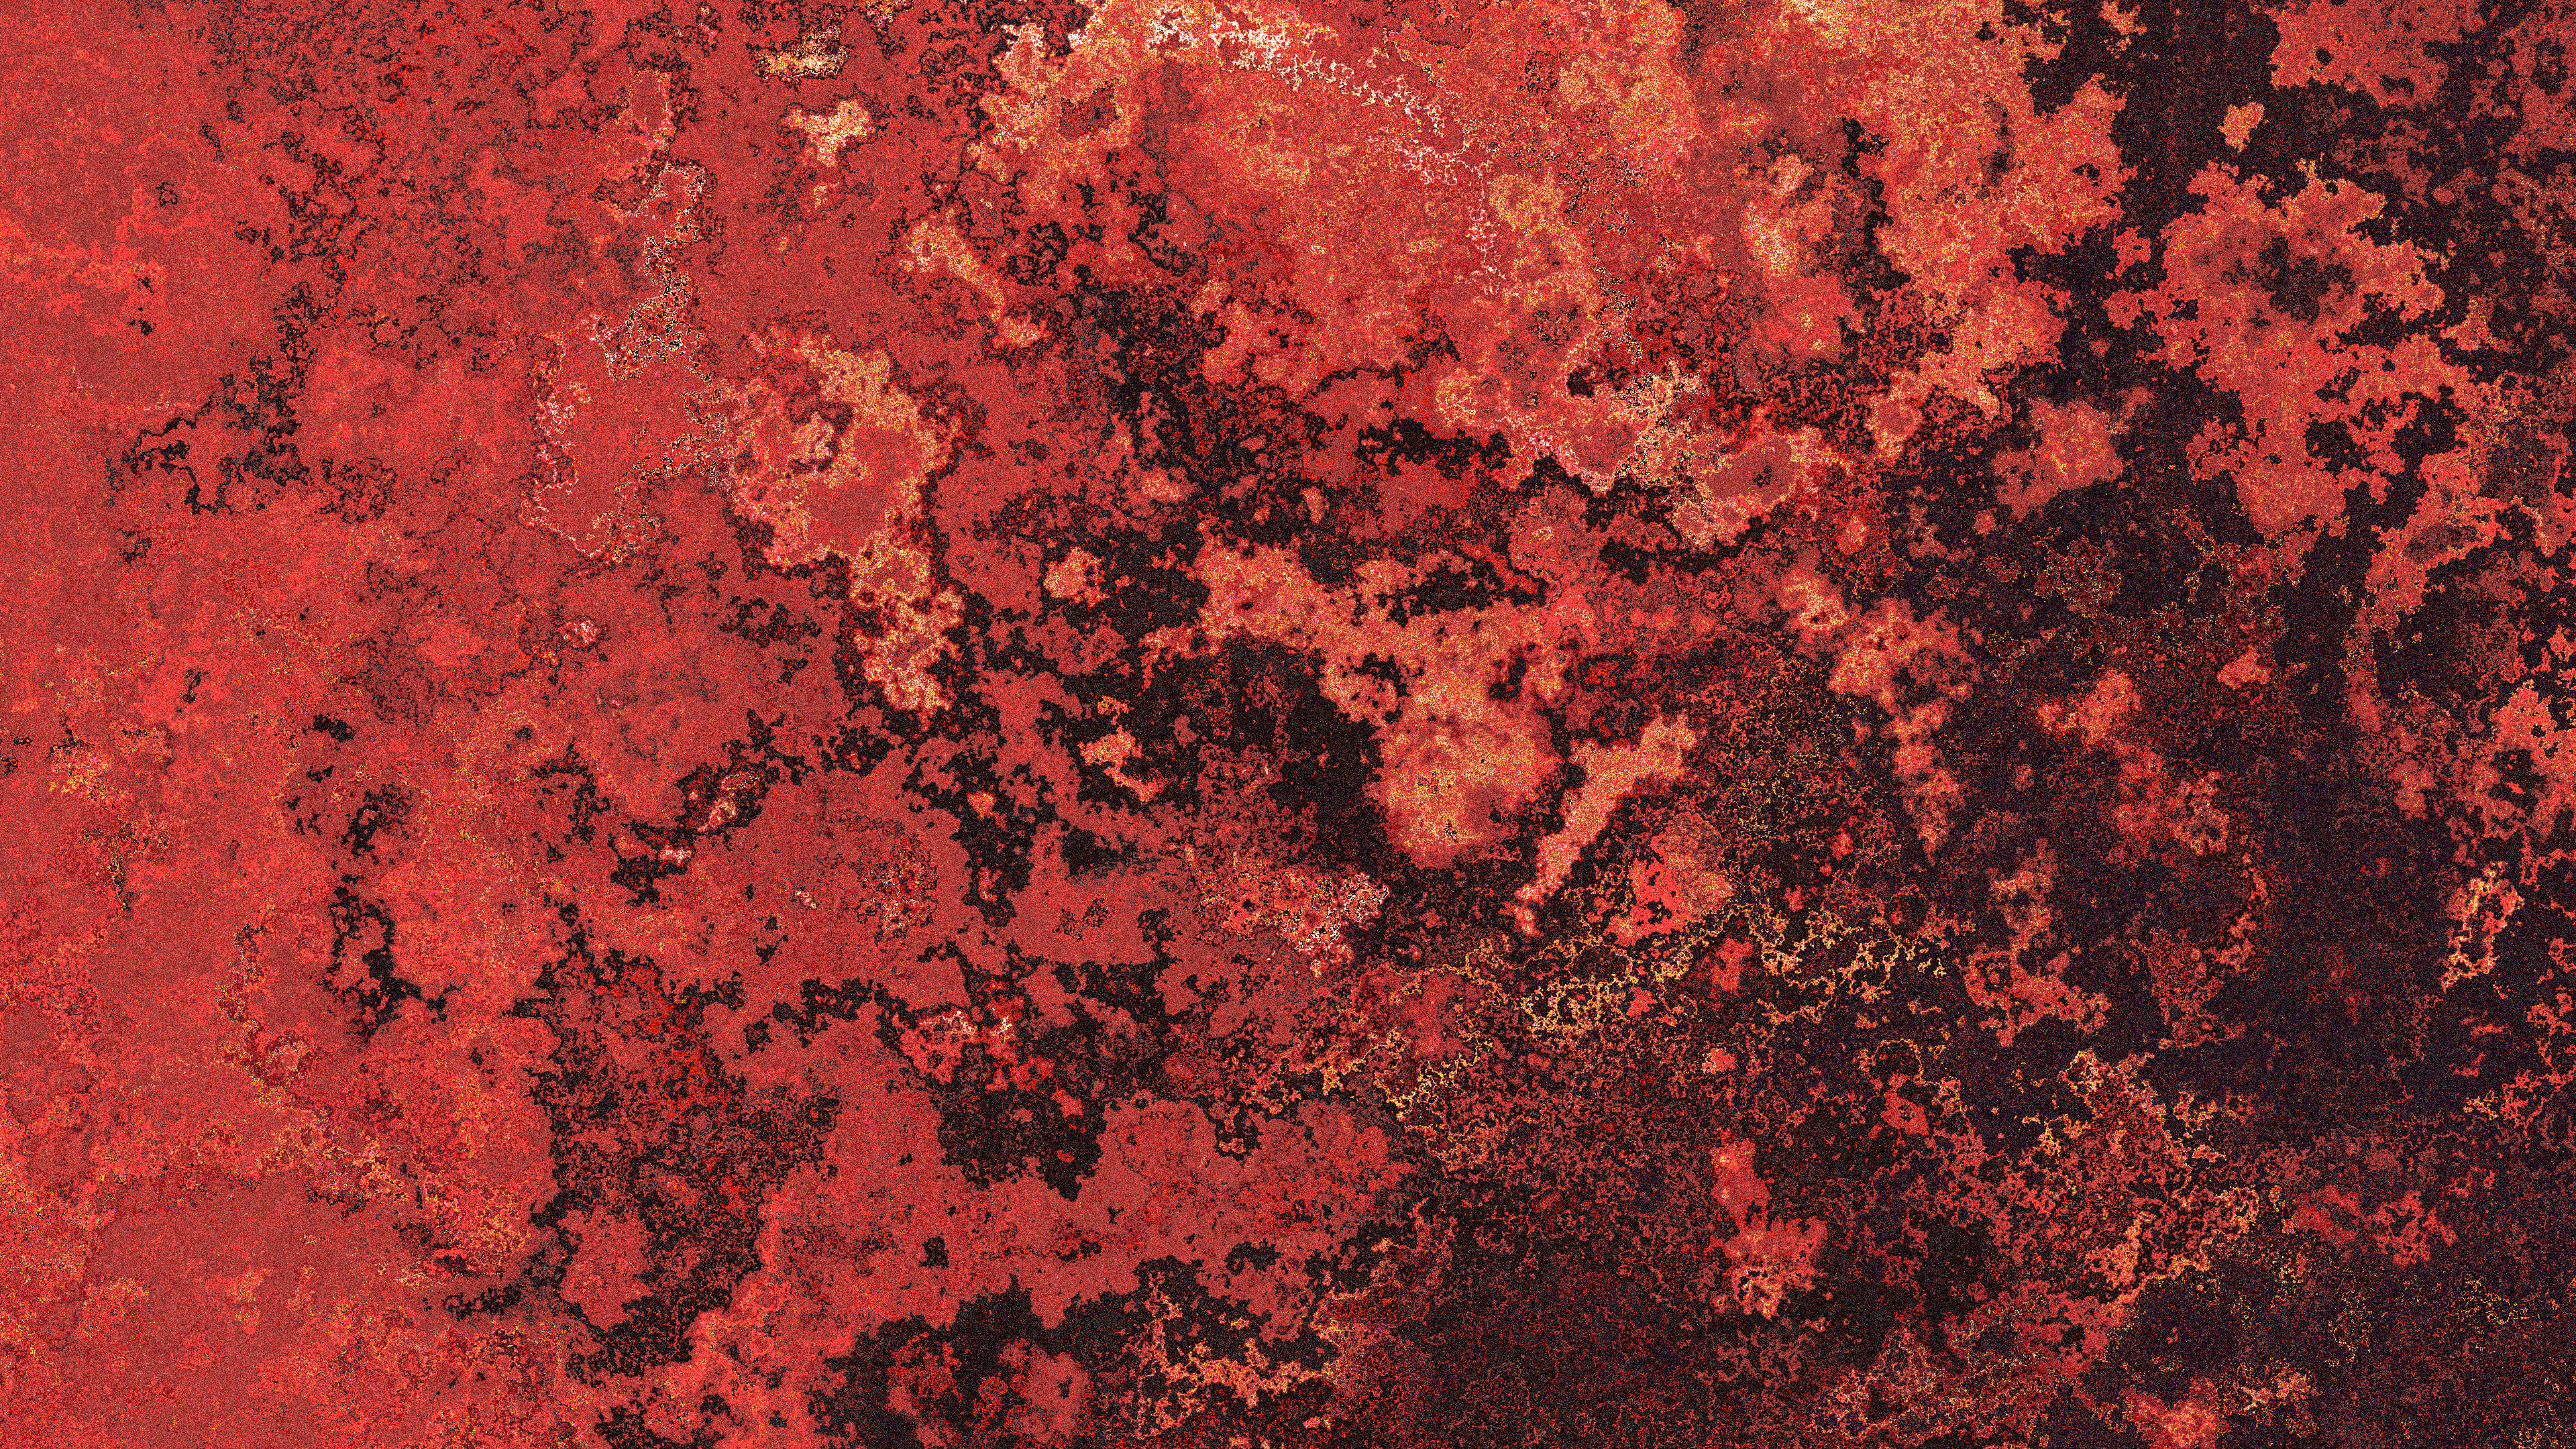 General 3840x2160 red contrast abstract dark texture